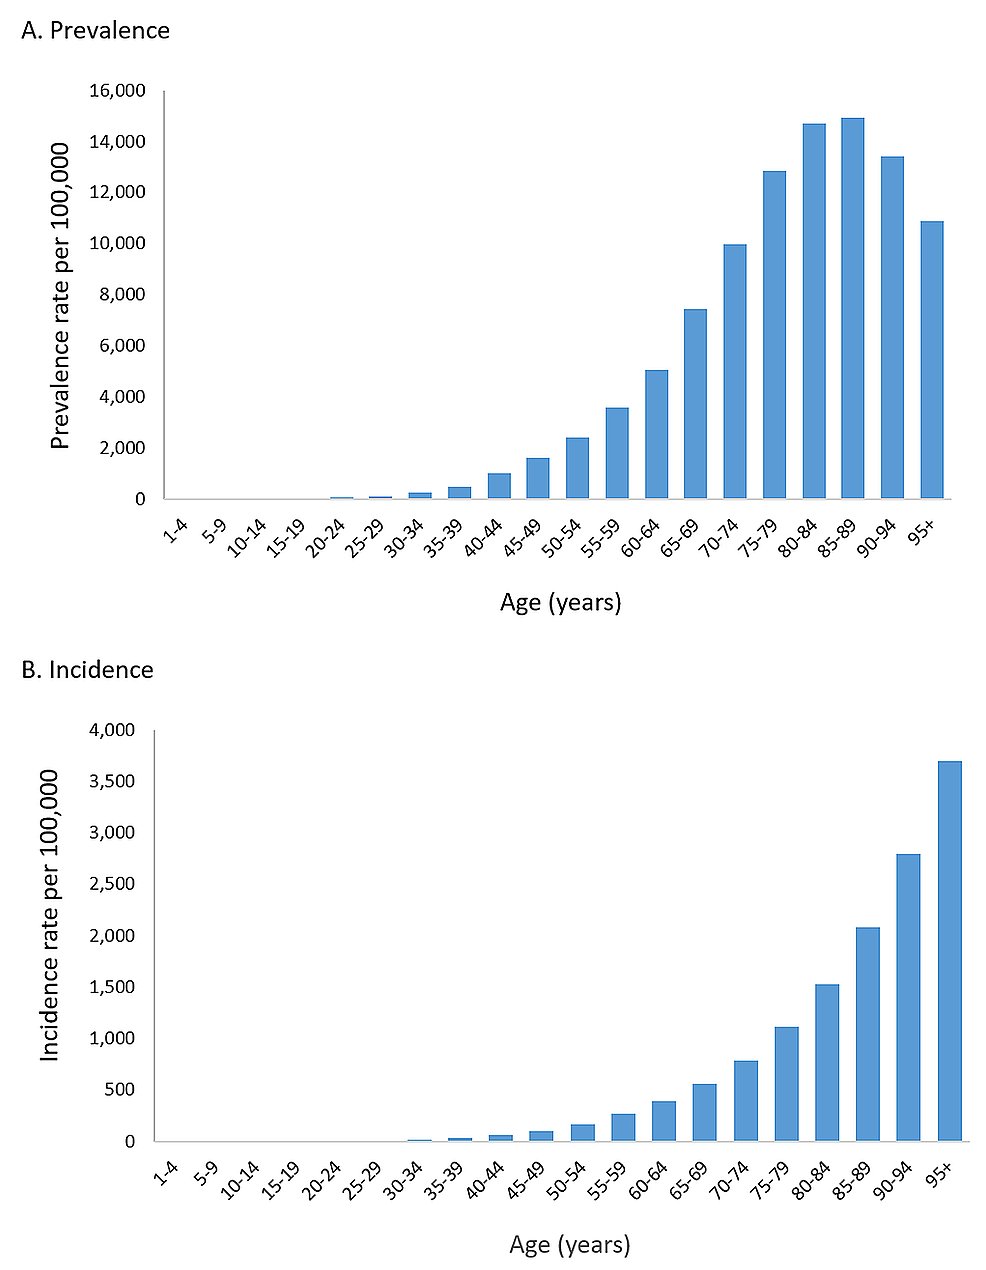 Age-distribution-of-ischemic-heart-disease-worldwide-based-on-prevalence-(A)-and-incidence-(B),-2017